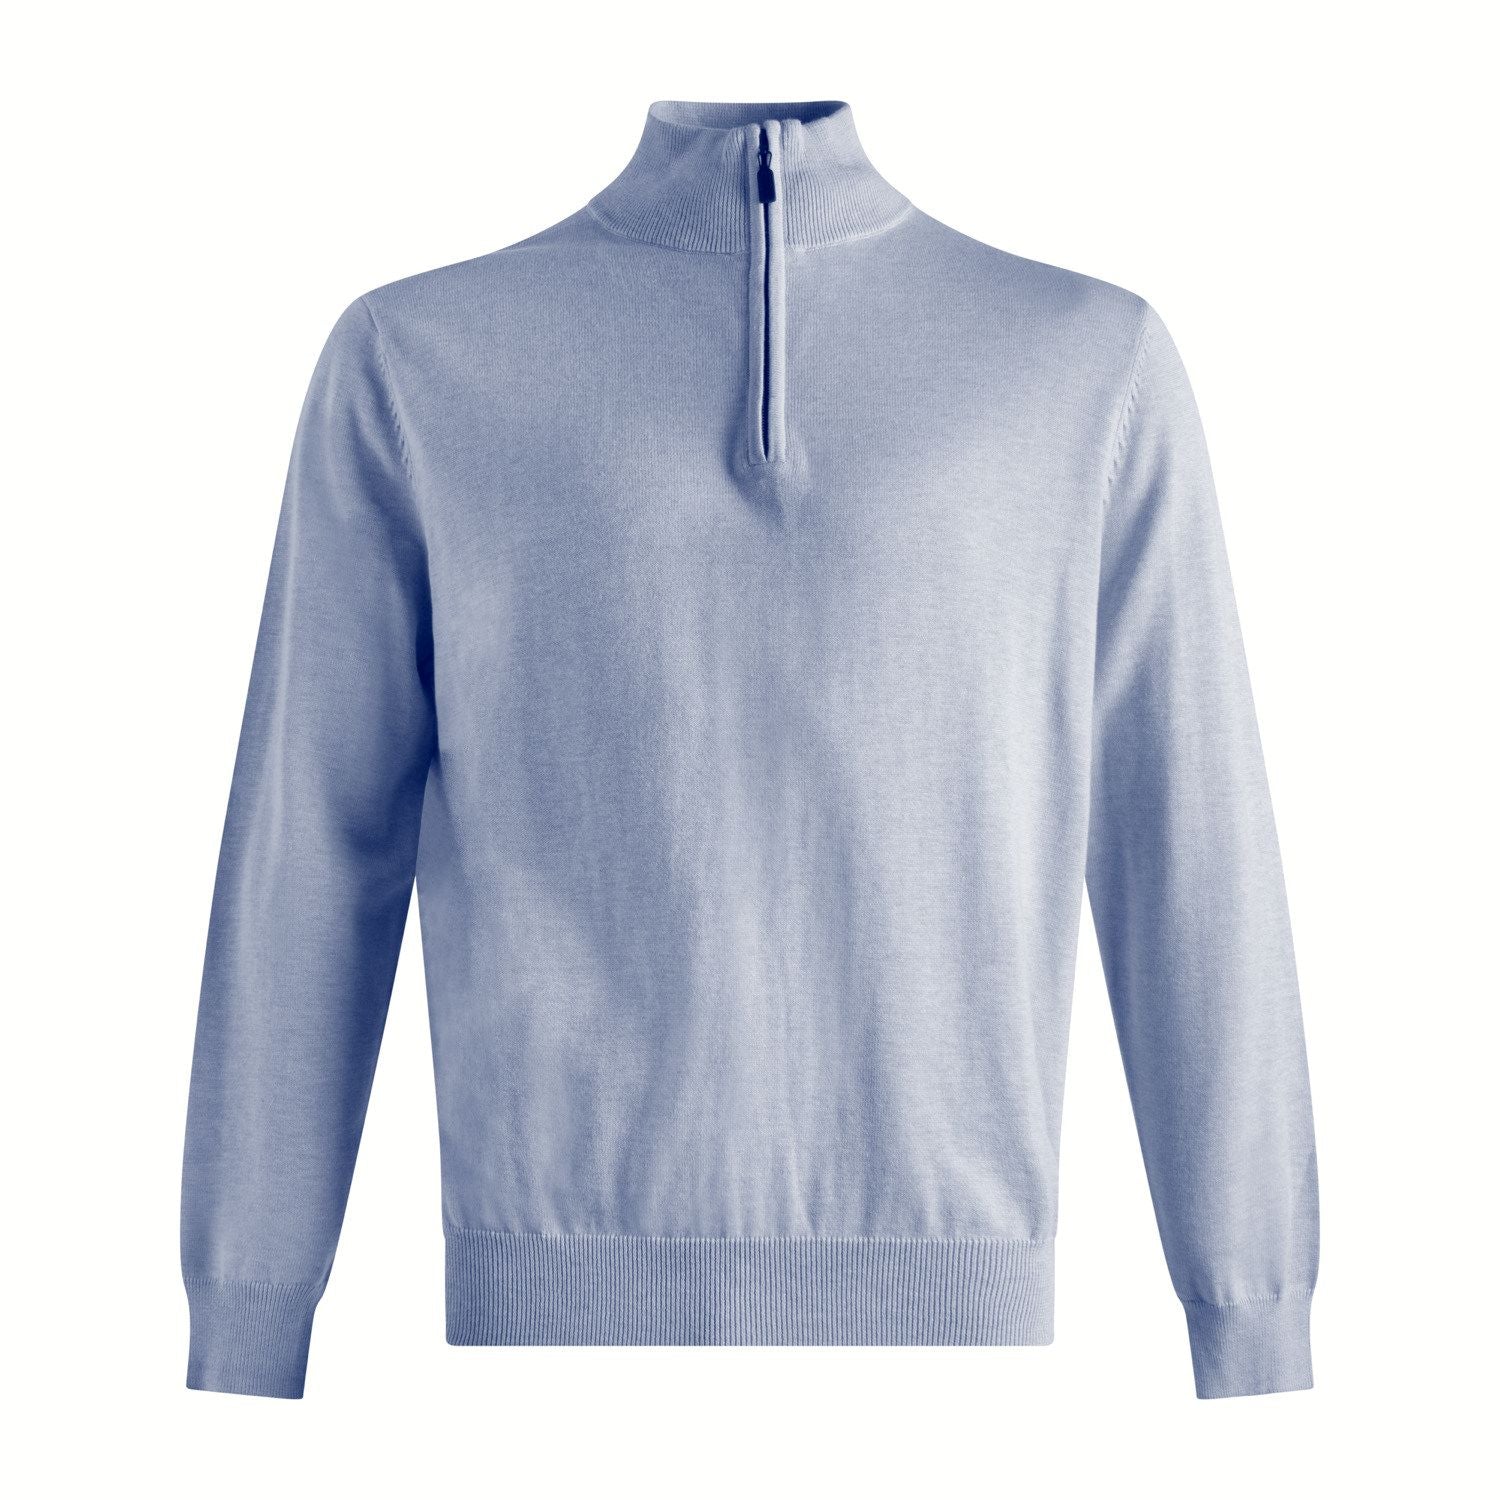 Cotton and Silk Blend Quarter-Zip Mock Neck Elbow Patch Sweater in Blueberry by Viyella